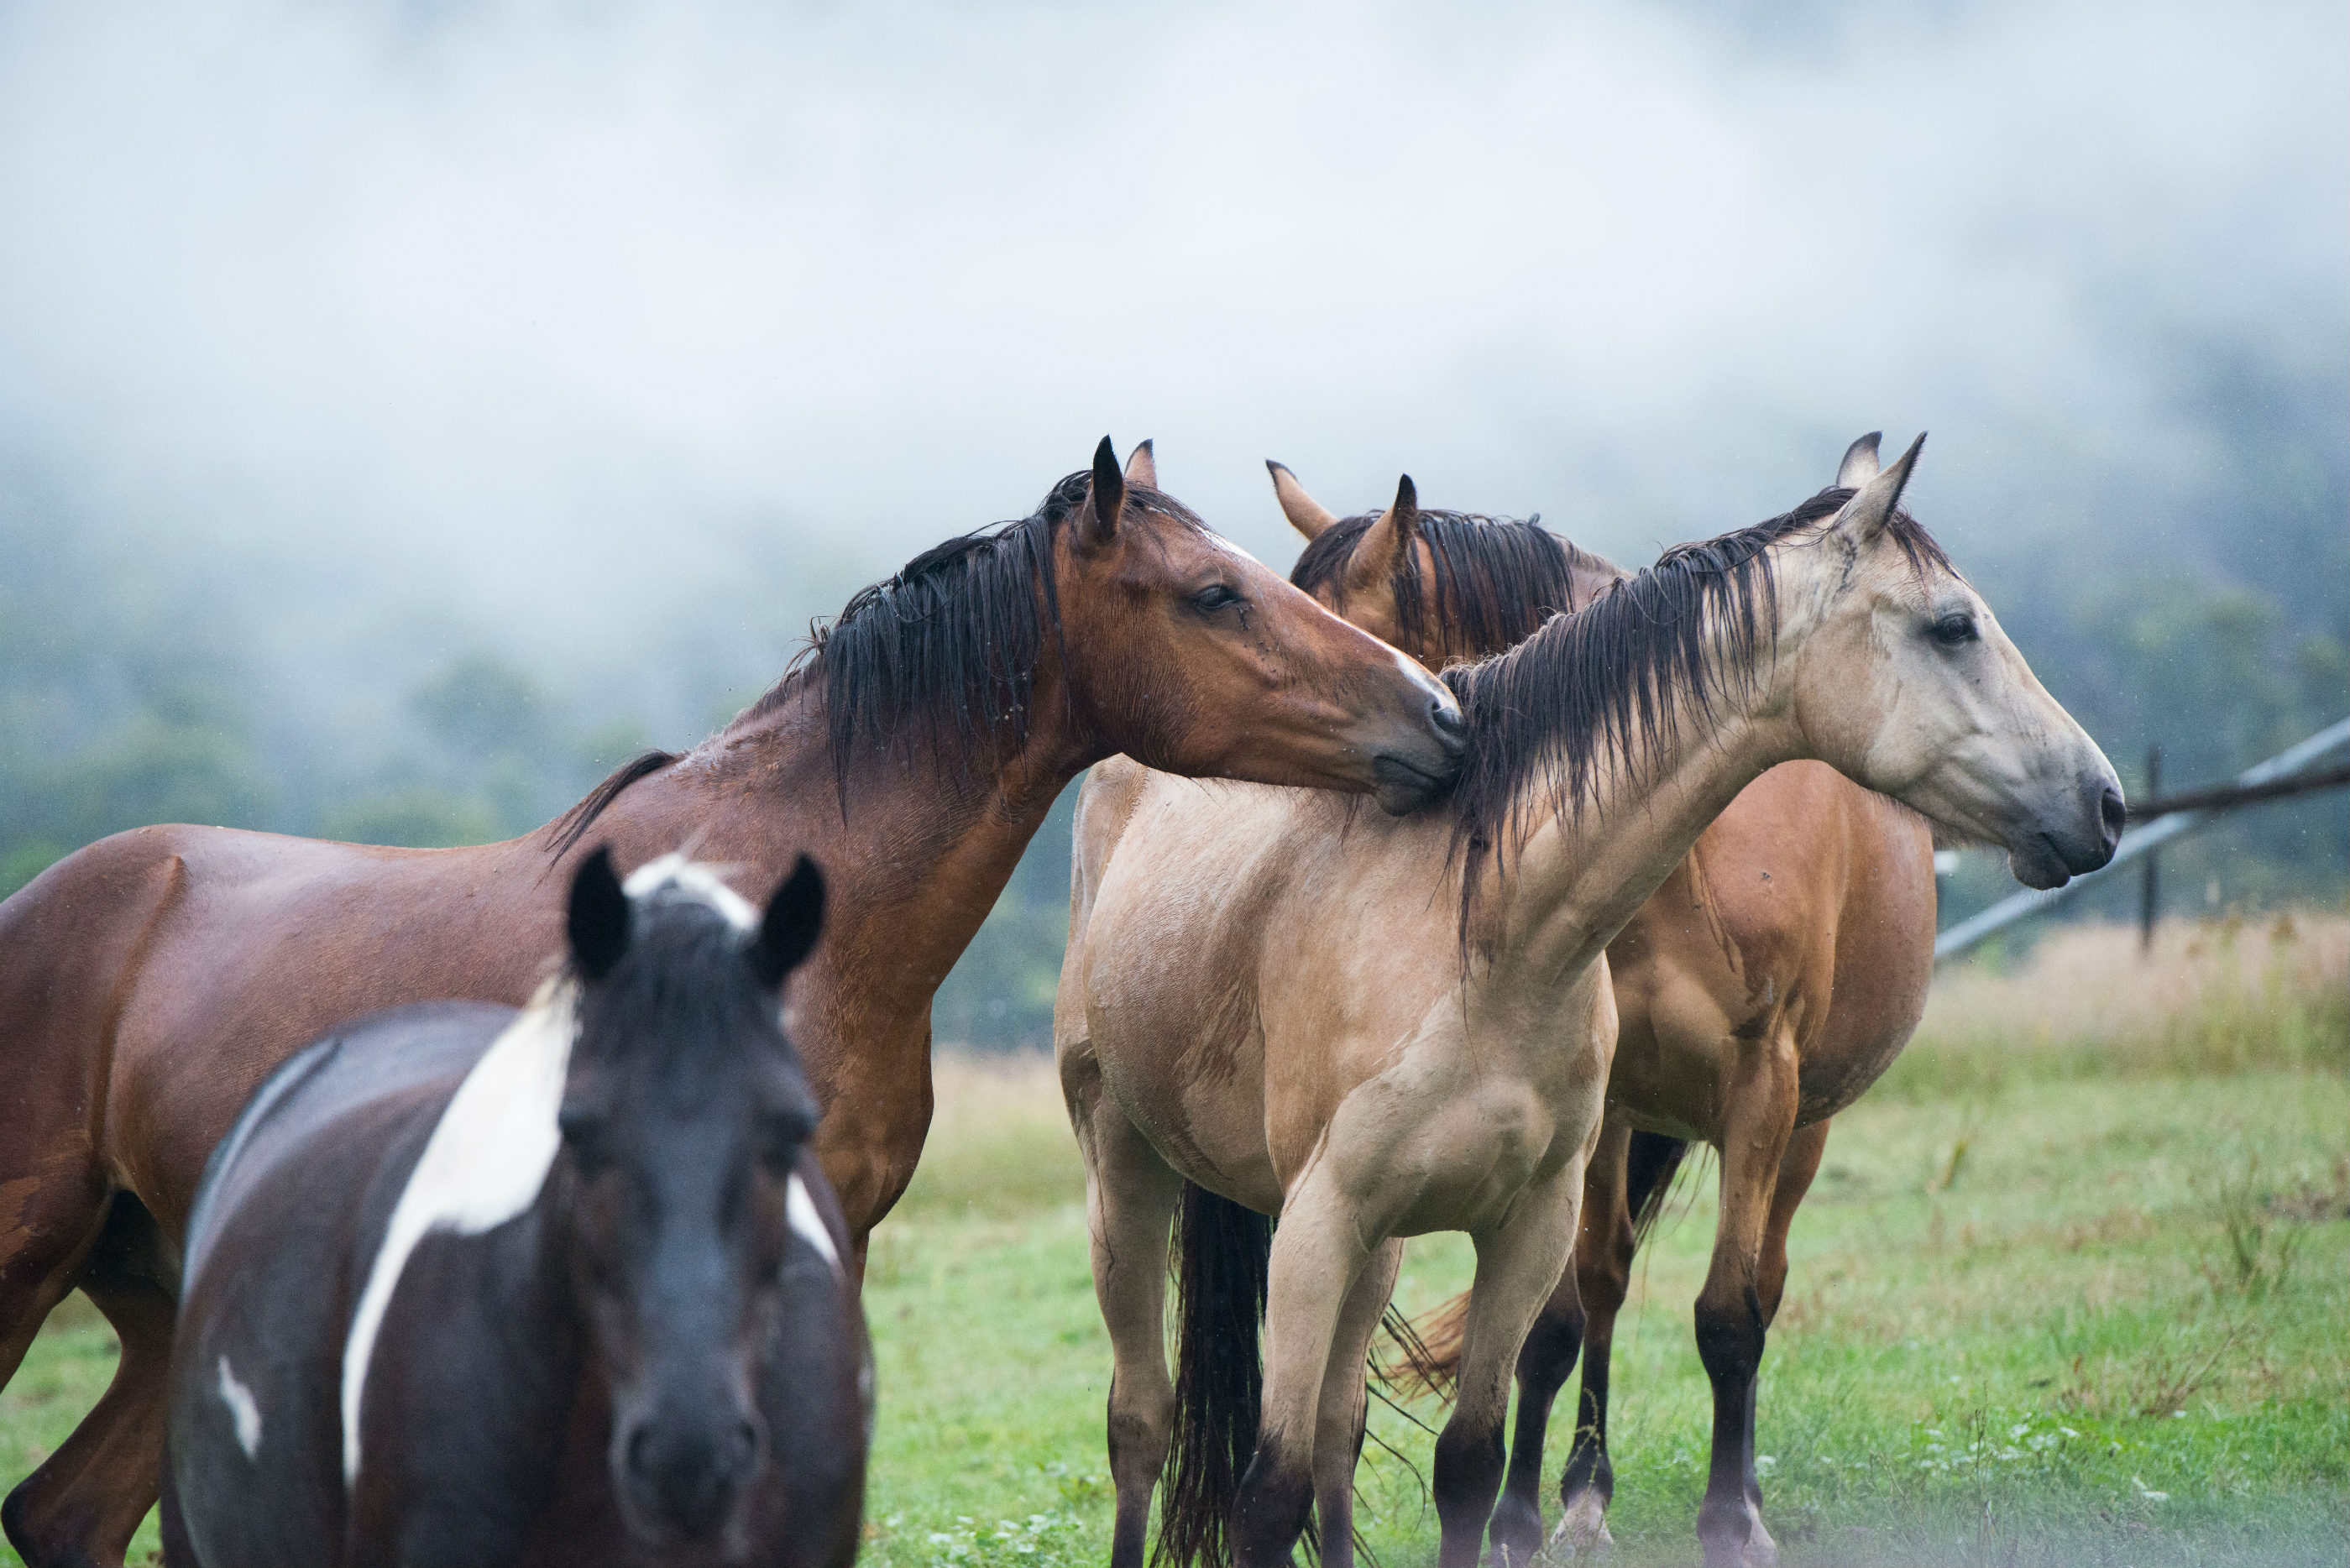 Horses gathered in a mist